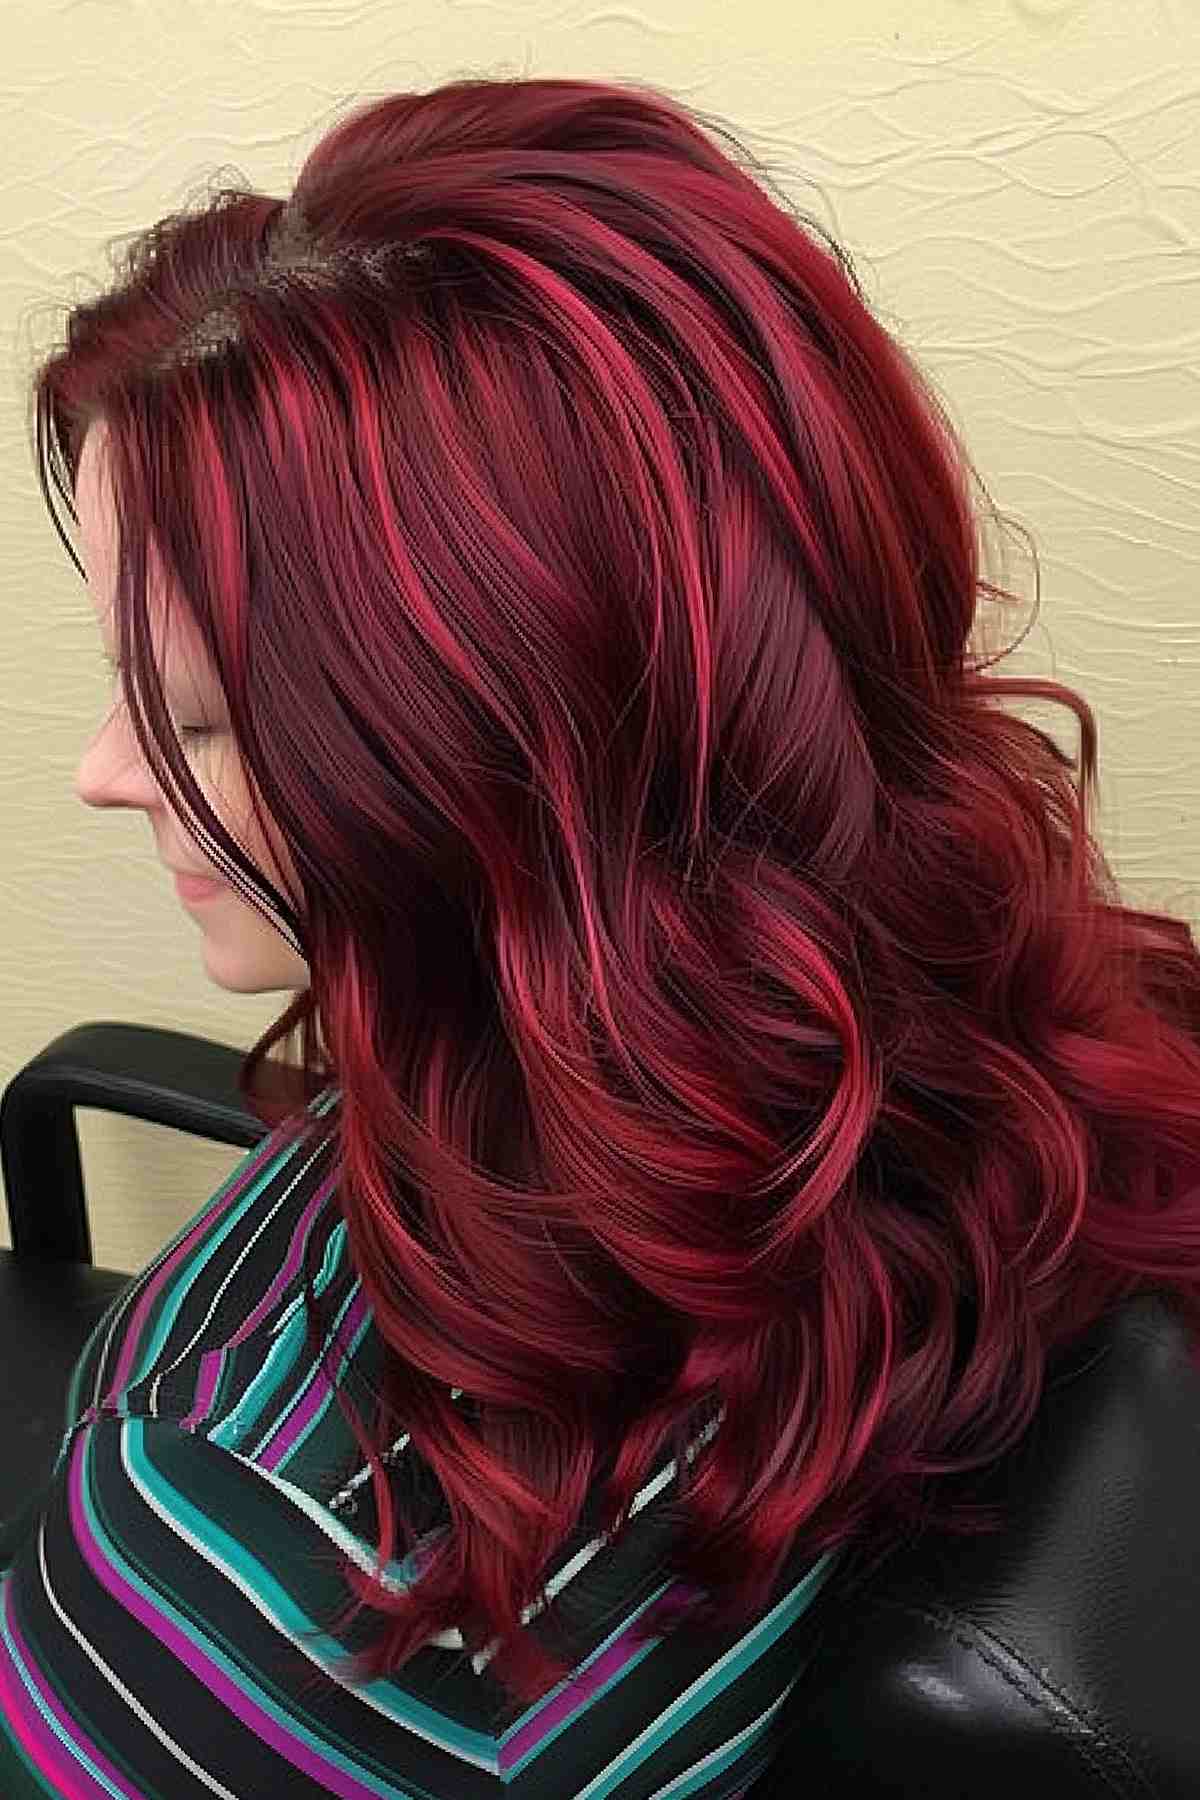 Medium-length cherry red hair with subtle highlights and side-swept styling.